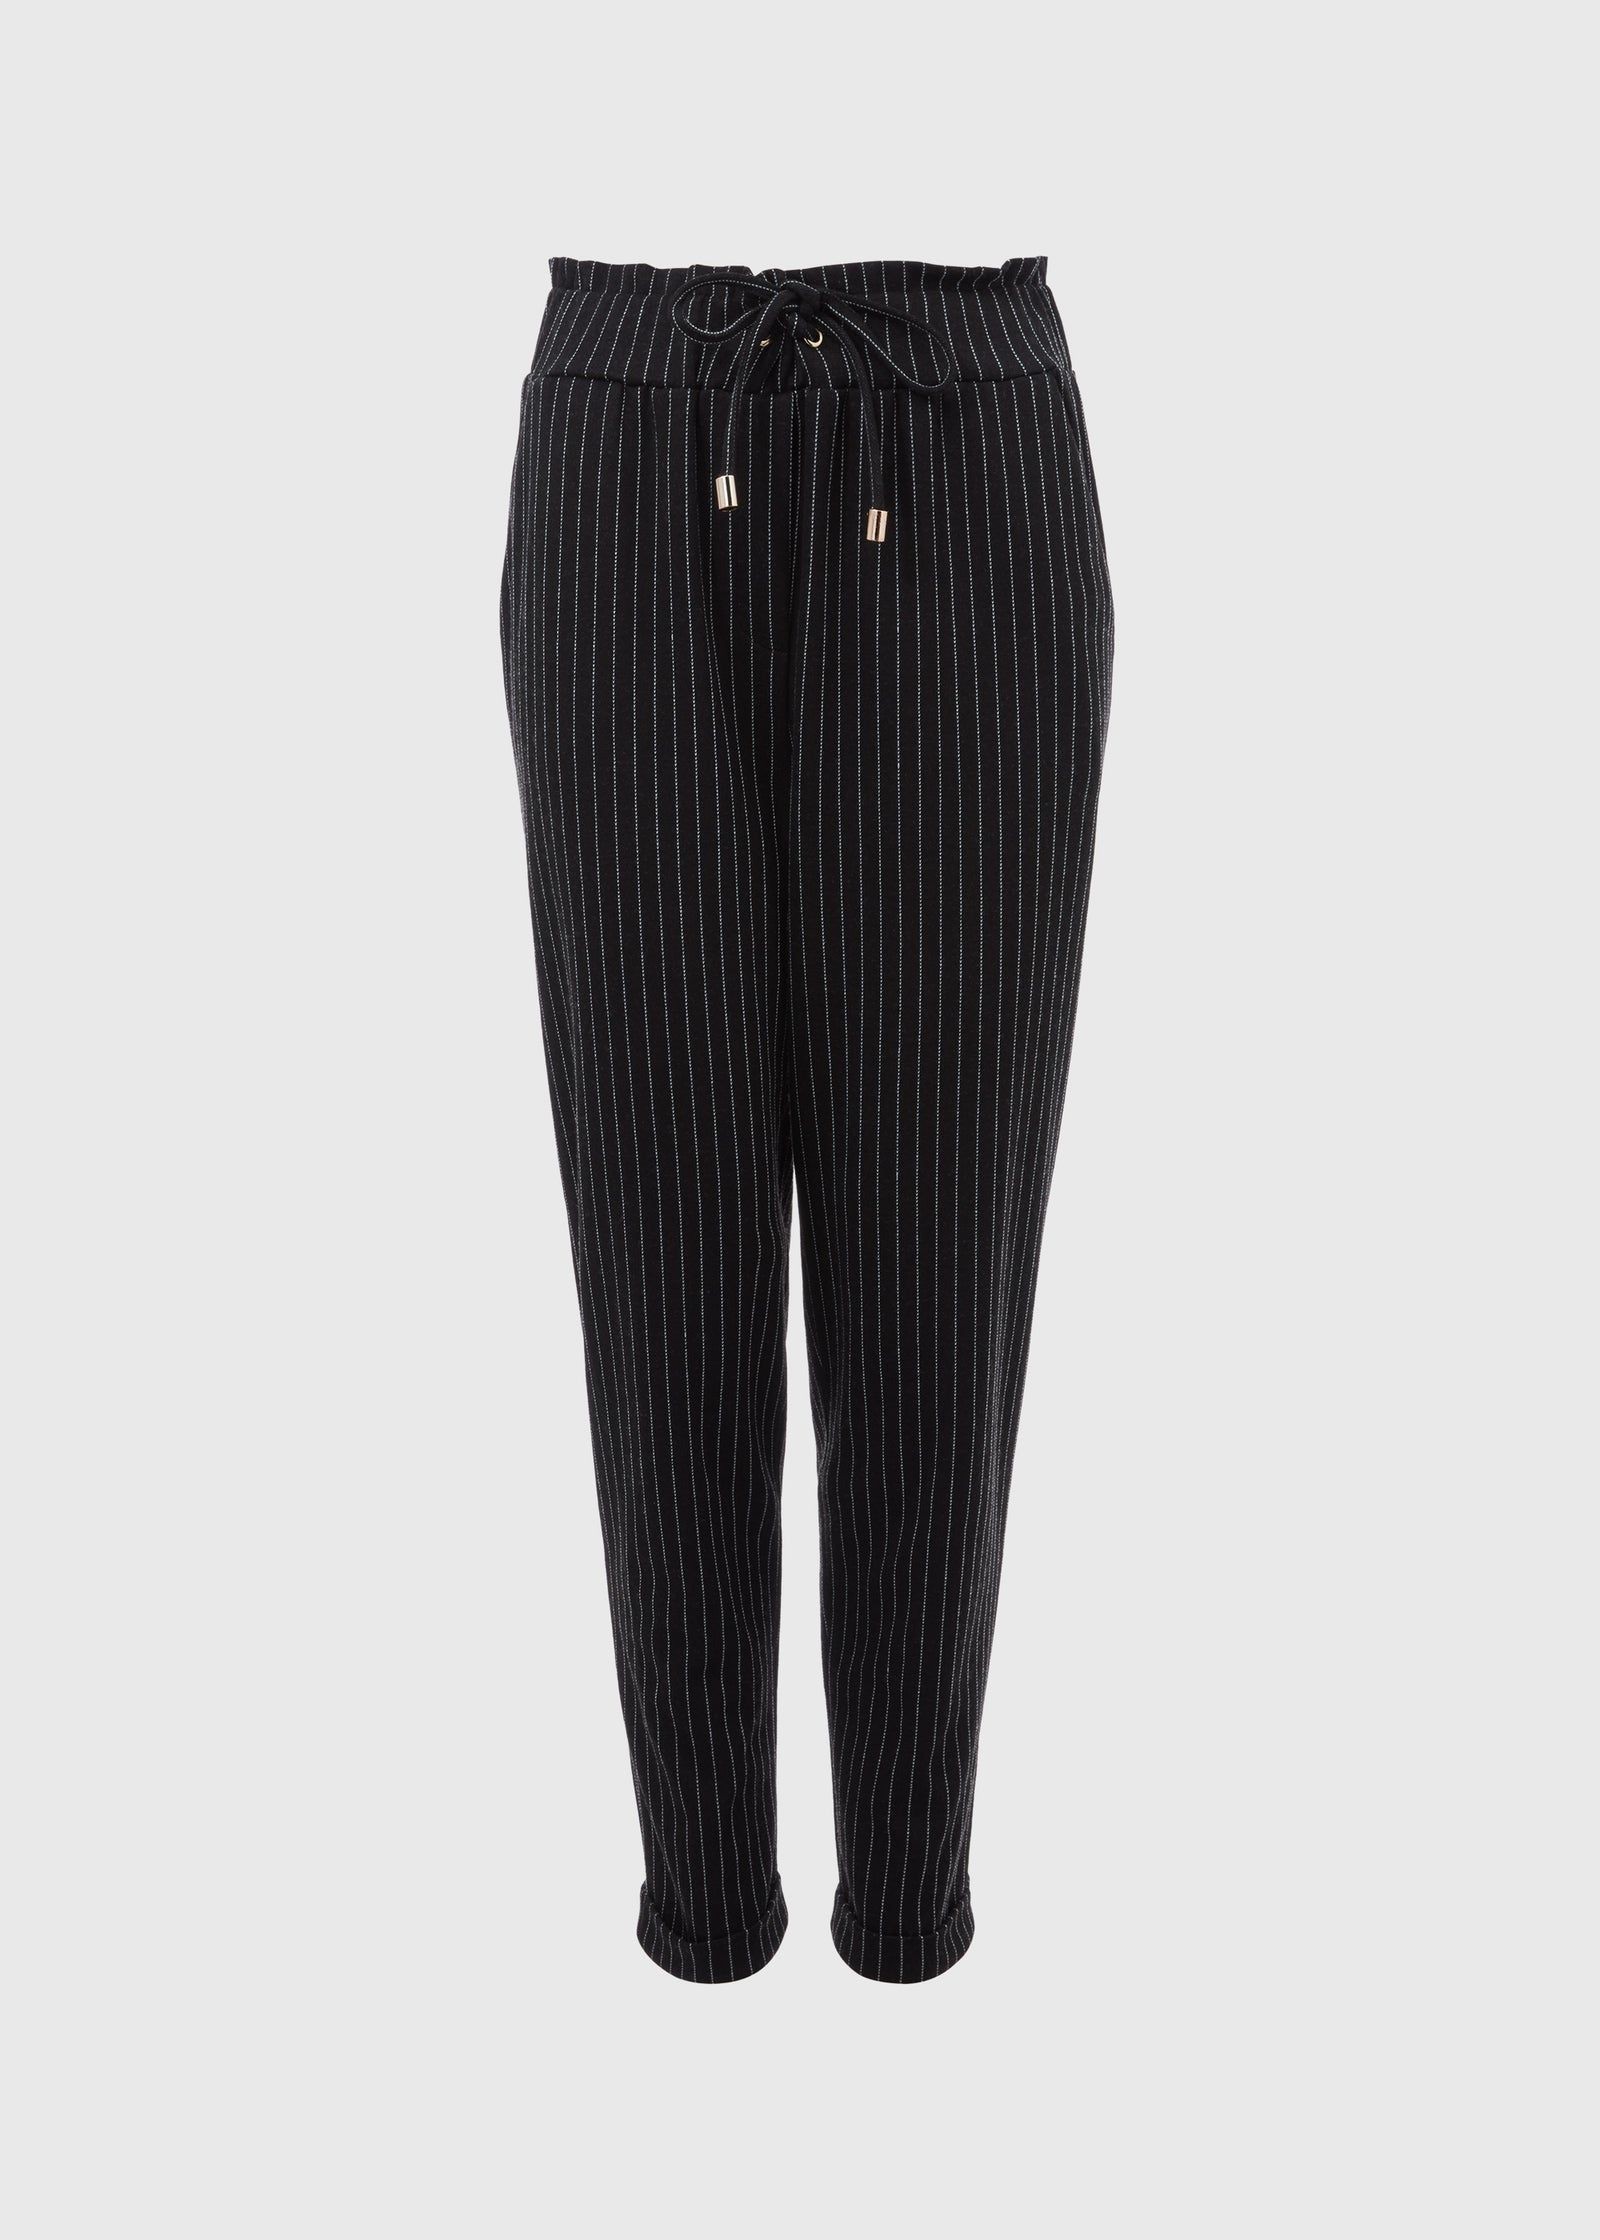 Buy Women's Trousers & Pants at Lowest Price in UAE - bfab